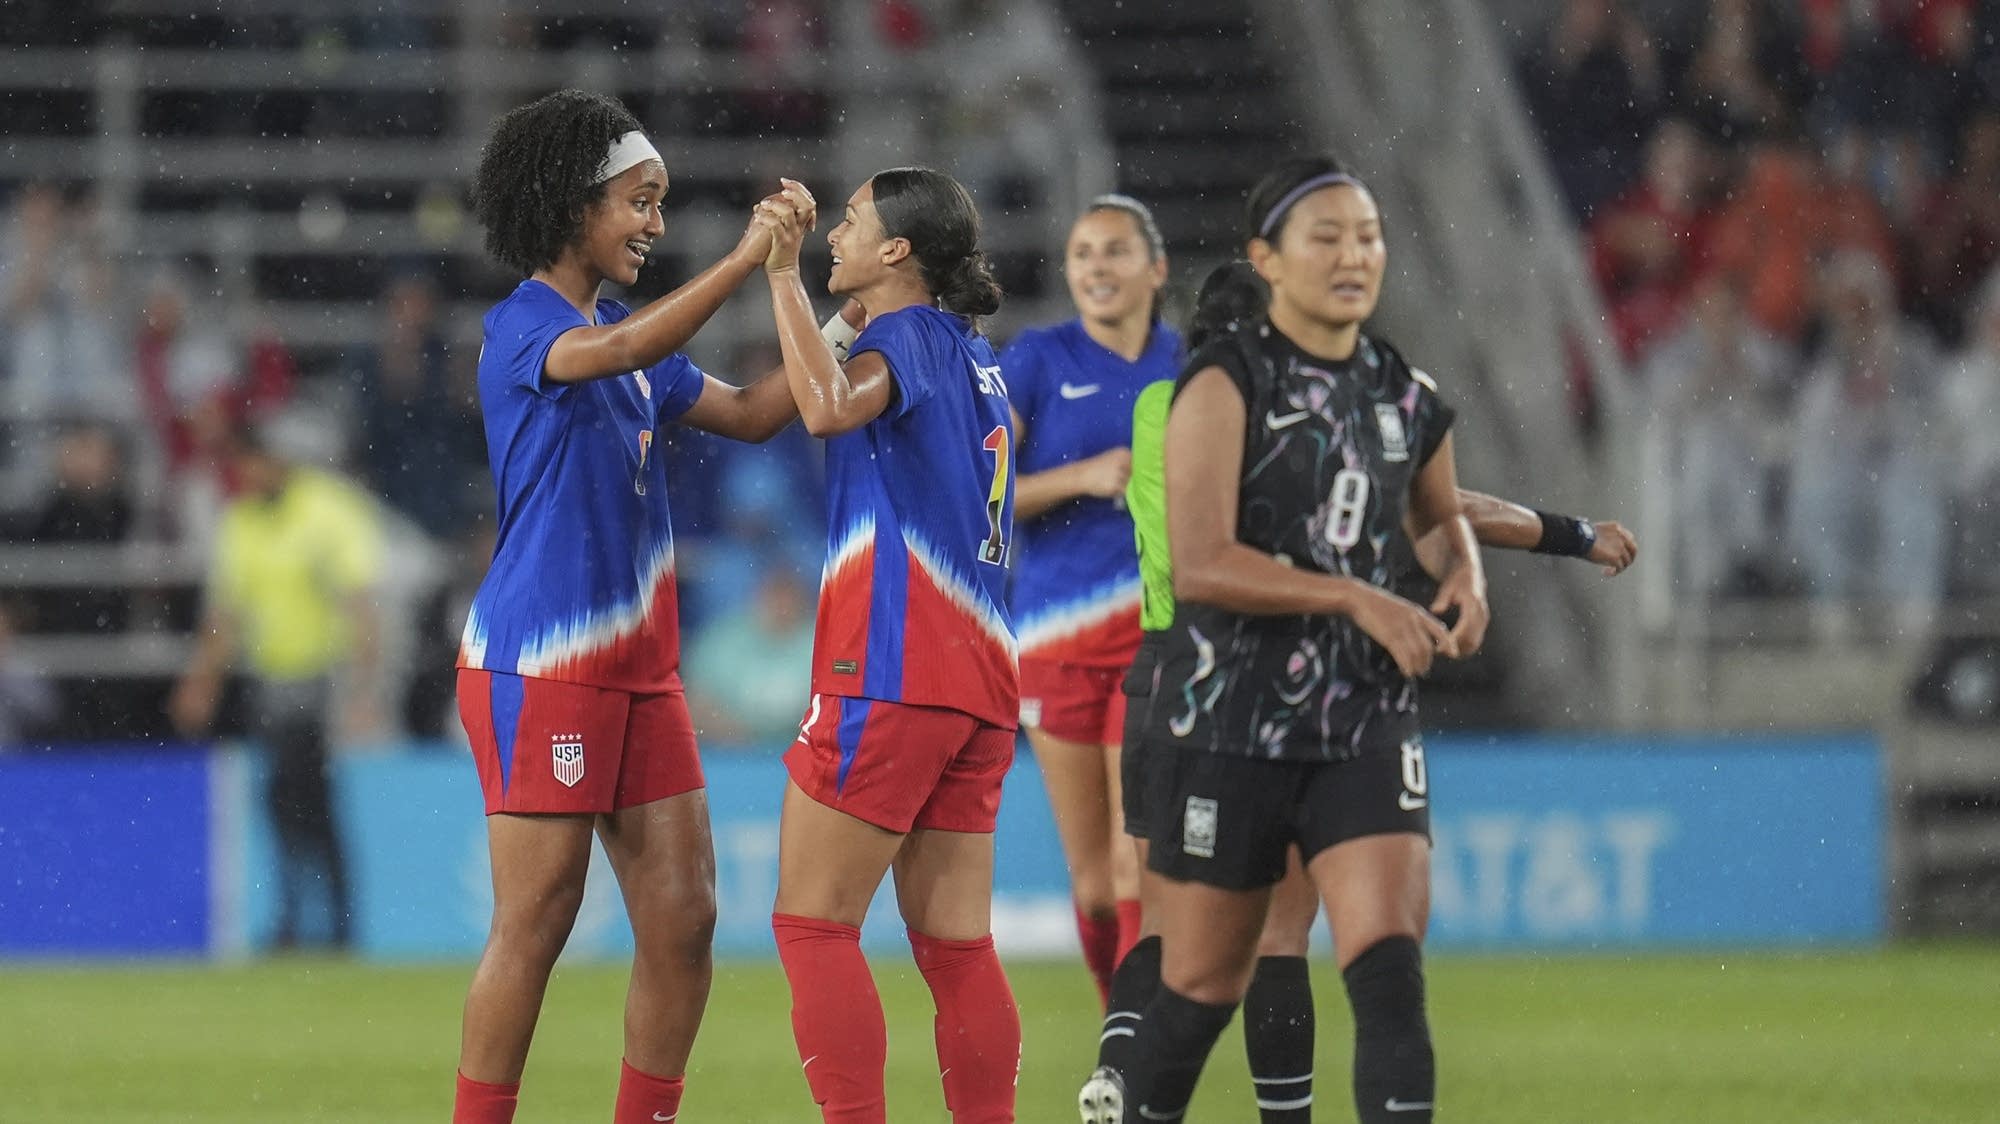 Teenager Lily Yohannes scores to help the U.S. down South Korea 3-0 as the Olympics loom